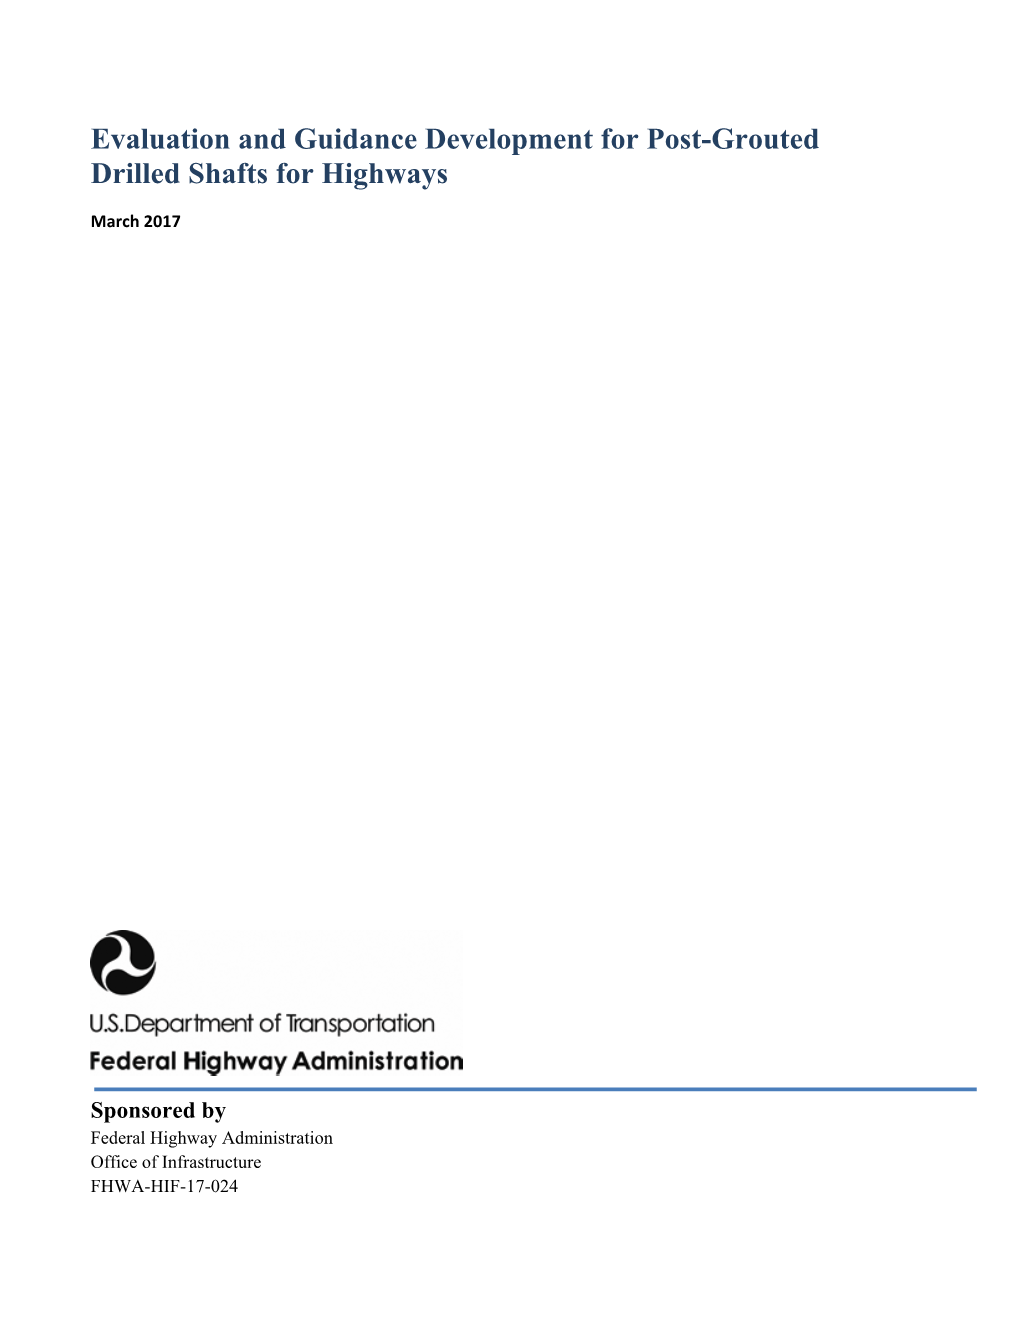 Evaluation and Guidance Development for Post-Grouted Drilled Shafts for Highways